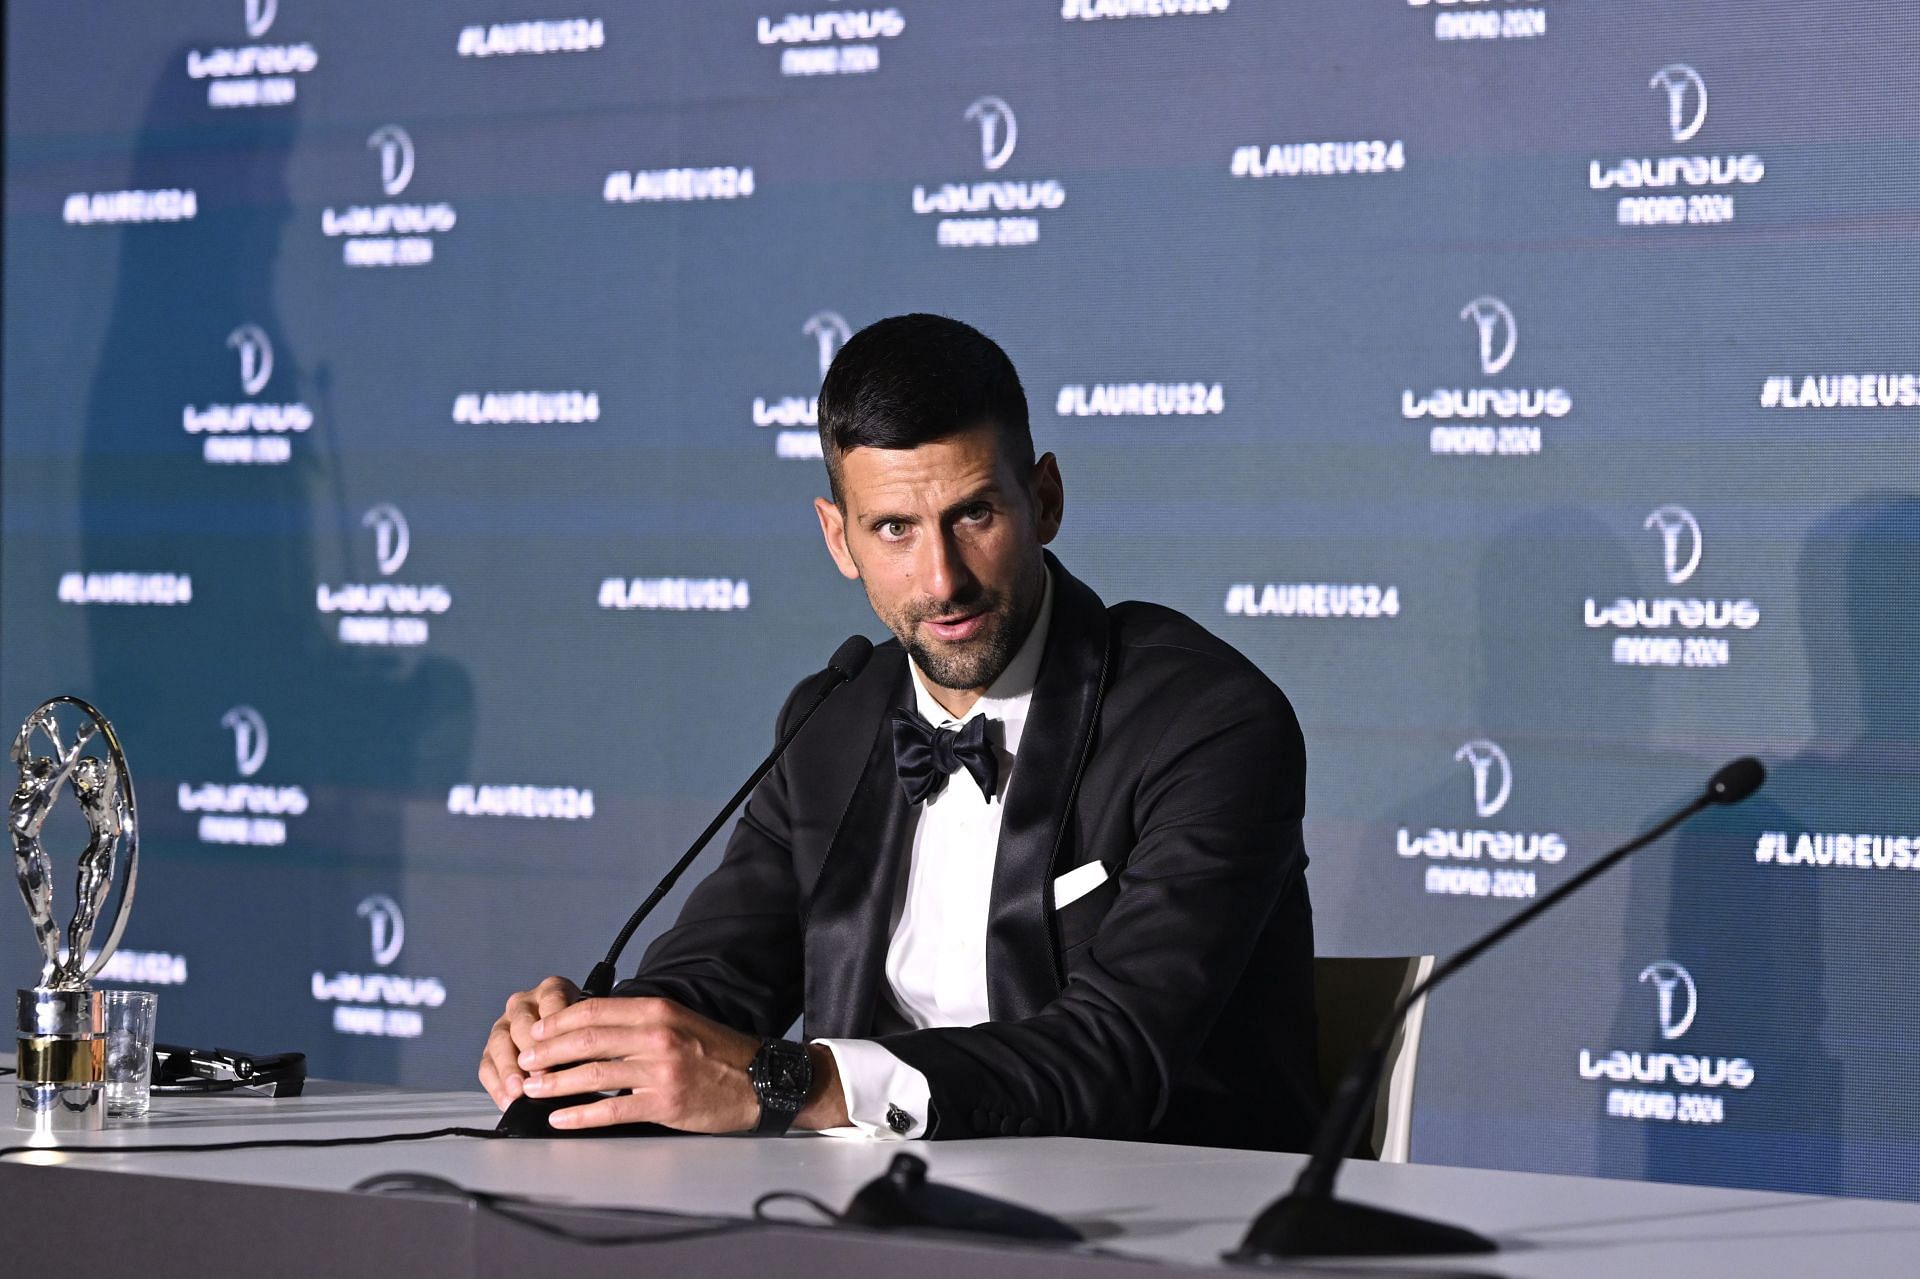 Everything Novak Djokovic said about saving tennis: Serb's concerns about declining popularity of the sport, proposed hybrid format & more